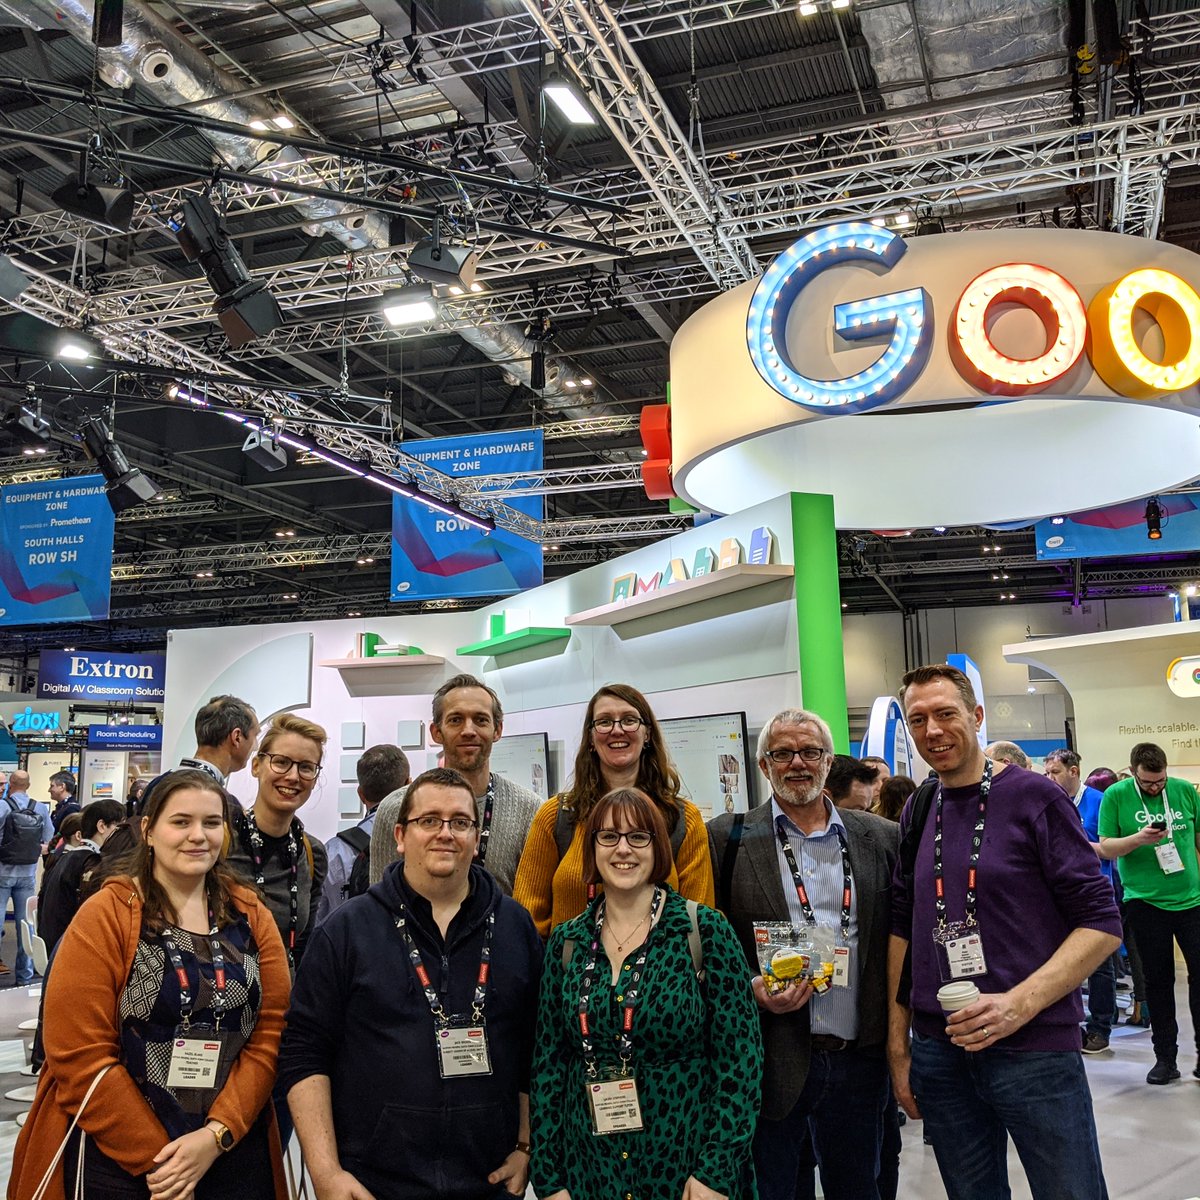 Just had a #DigitalLearning meeting talking about what we learned from our #BETT2020 trip. Things the group liked include: 
✅@GoogleForEdu originality reports 
✅@GetKahoot
✅@ThingLink
✅@canva
✅@soundtrap
✅@AdobeSpark 
✅@texthelp #WriQ
✅@LEGO_Education 
✅@explainevrythng